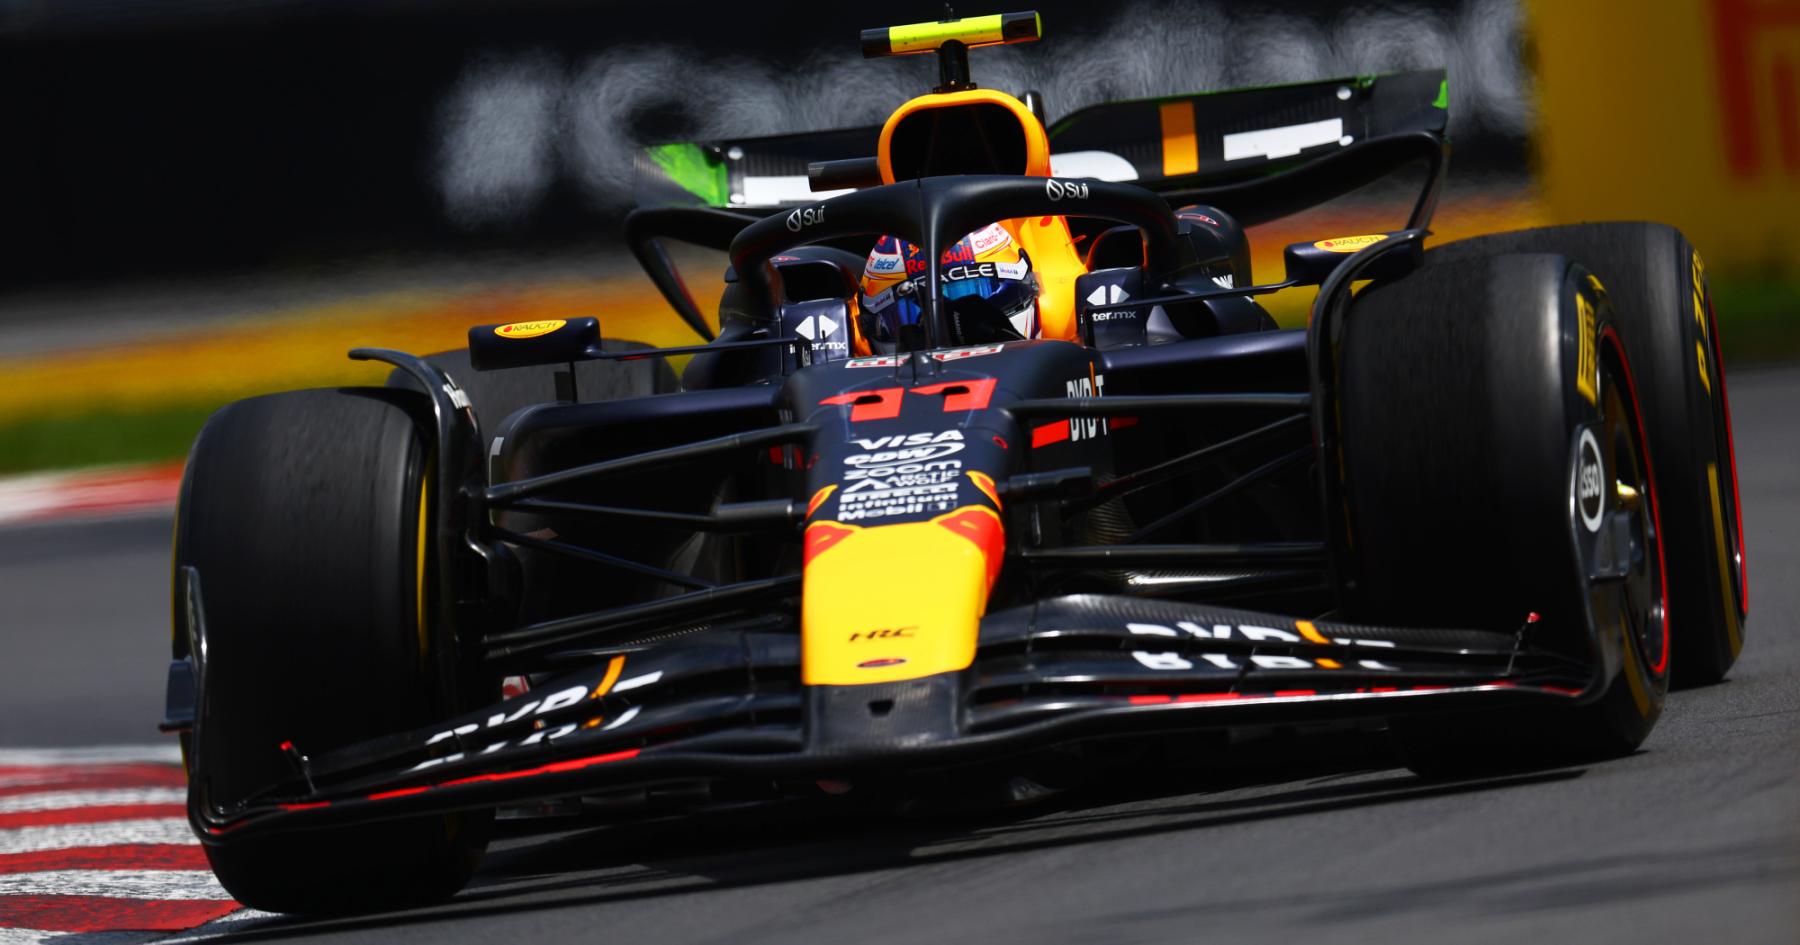 Perez's Canadian Grand Prix dreams derailed with stunning early exit in qualifying